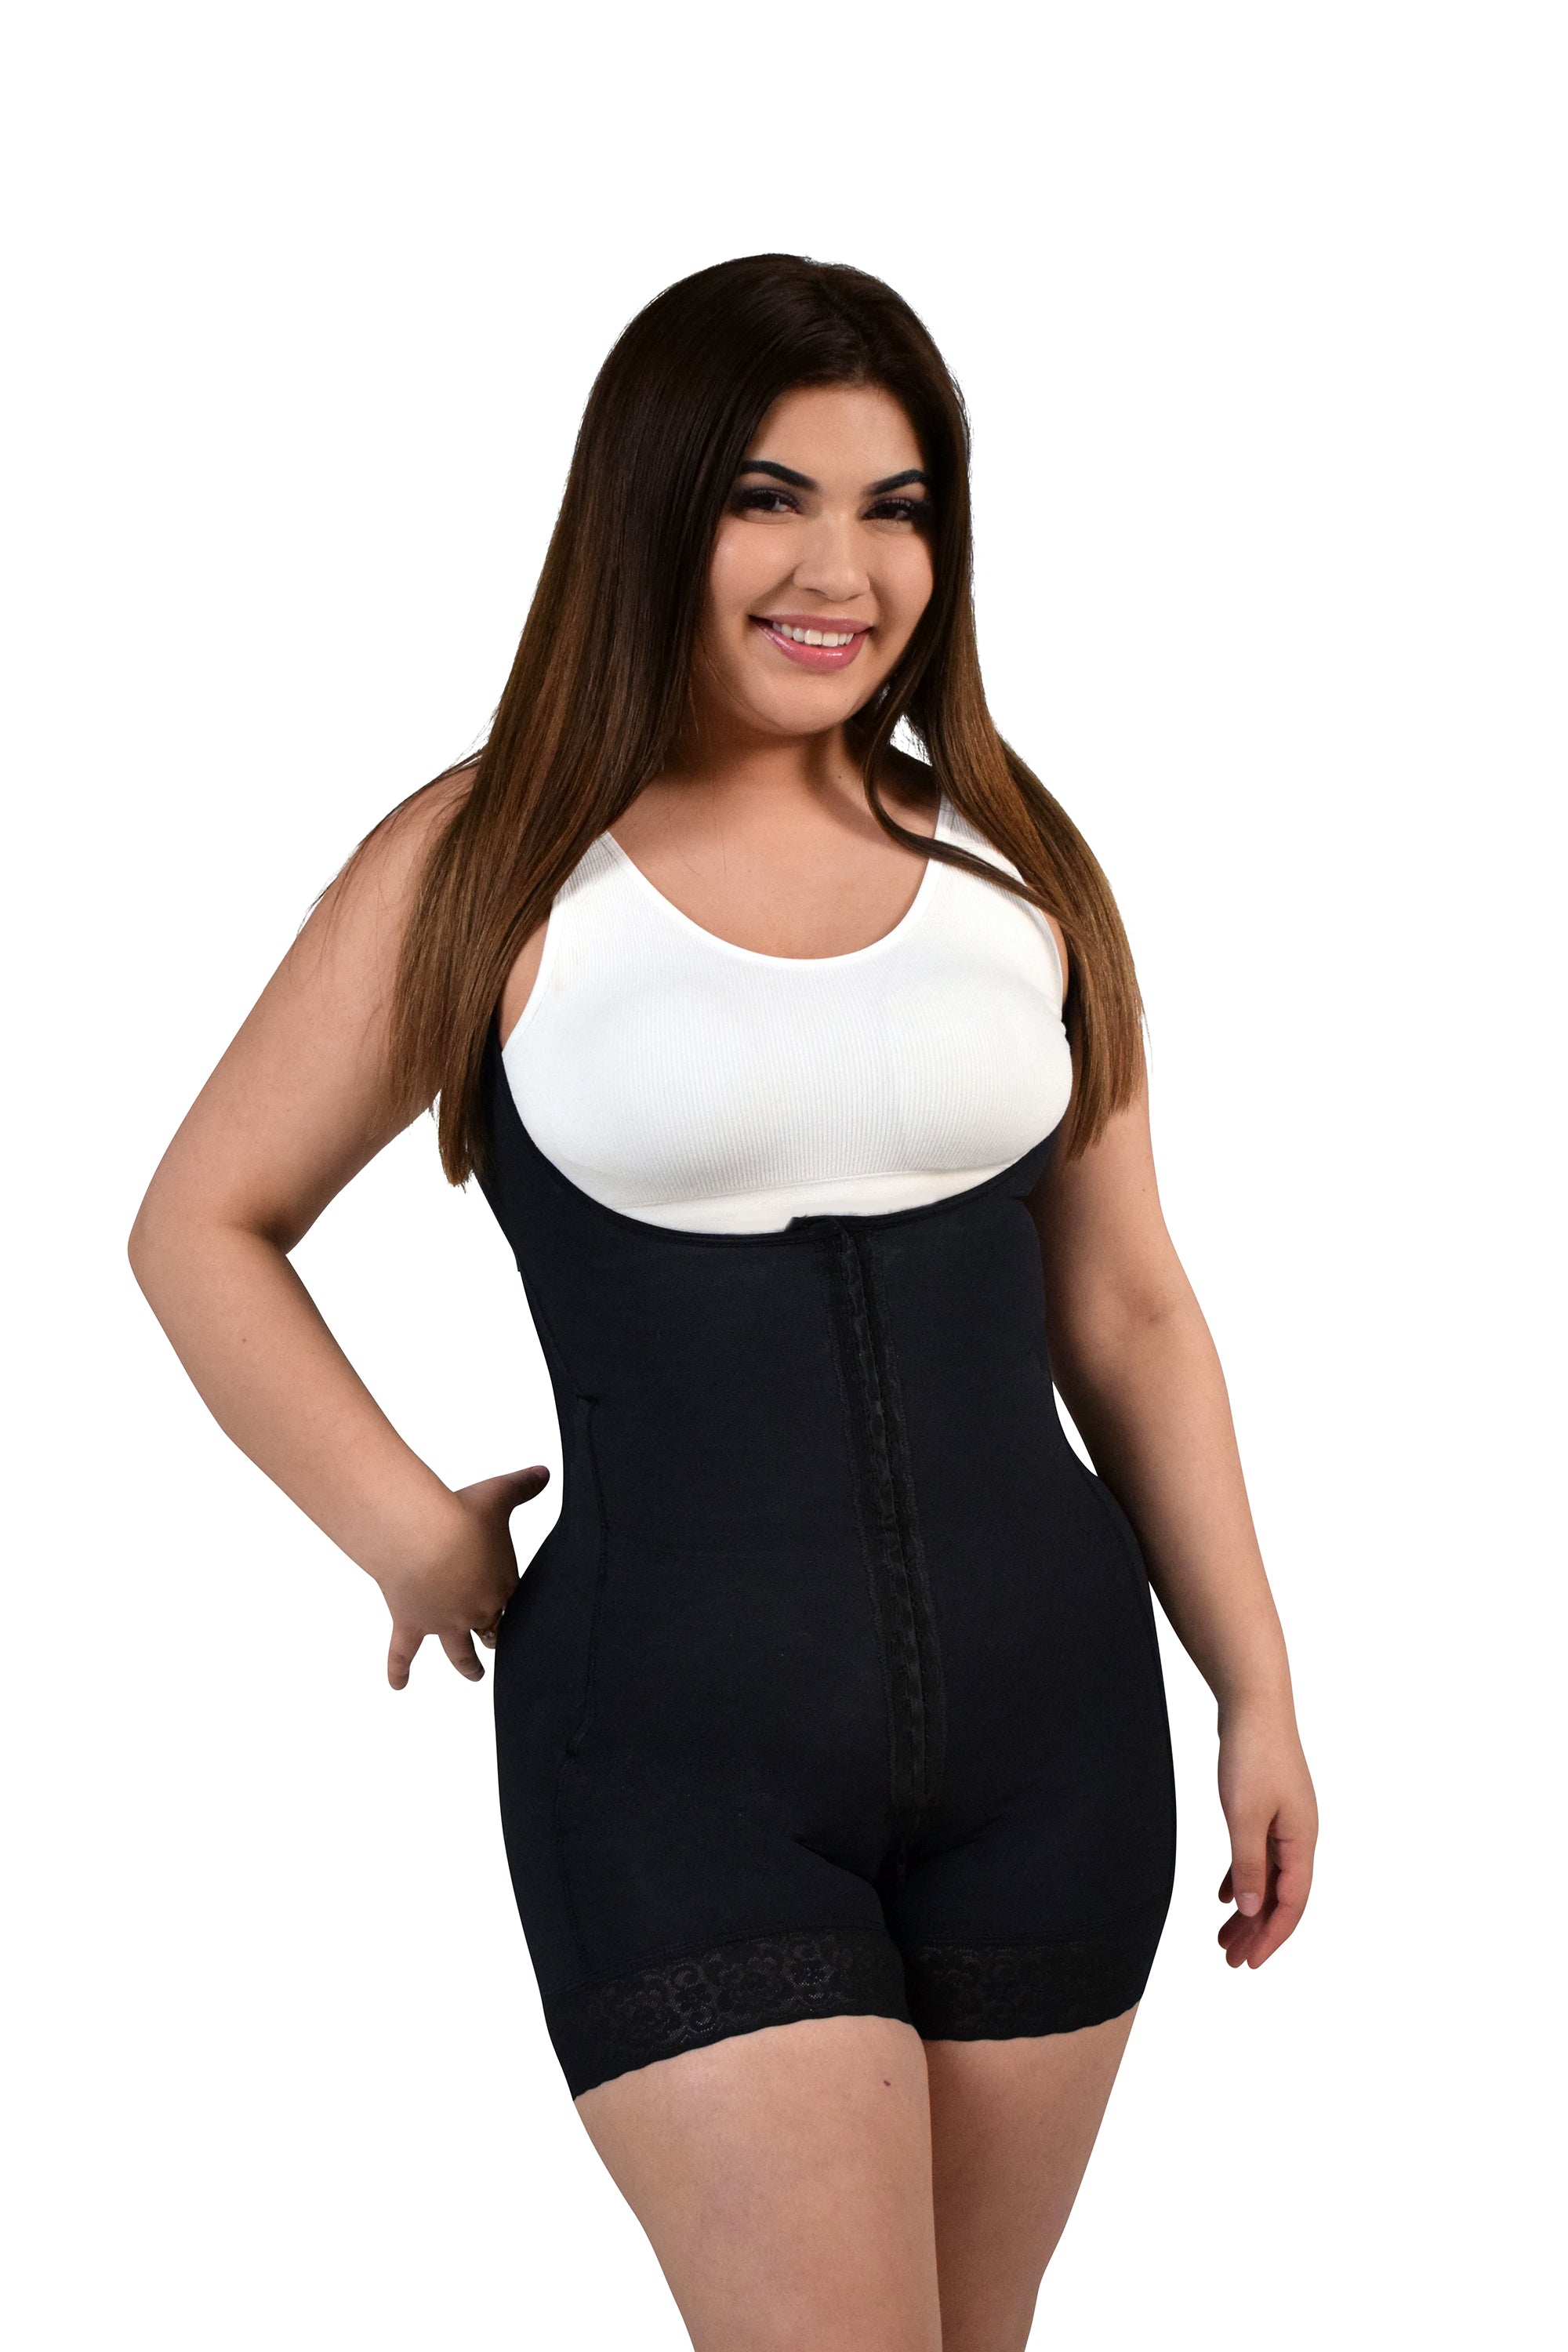 Posterior Control Pants With Tummy Control High Waist Slimming Corset –